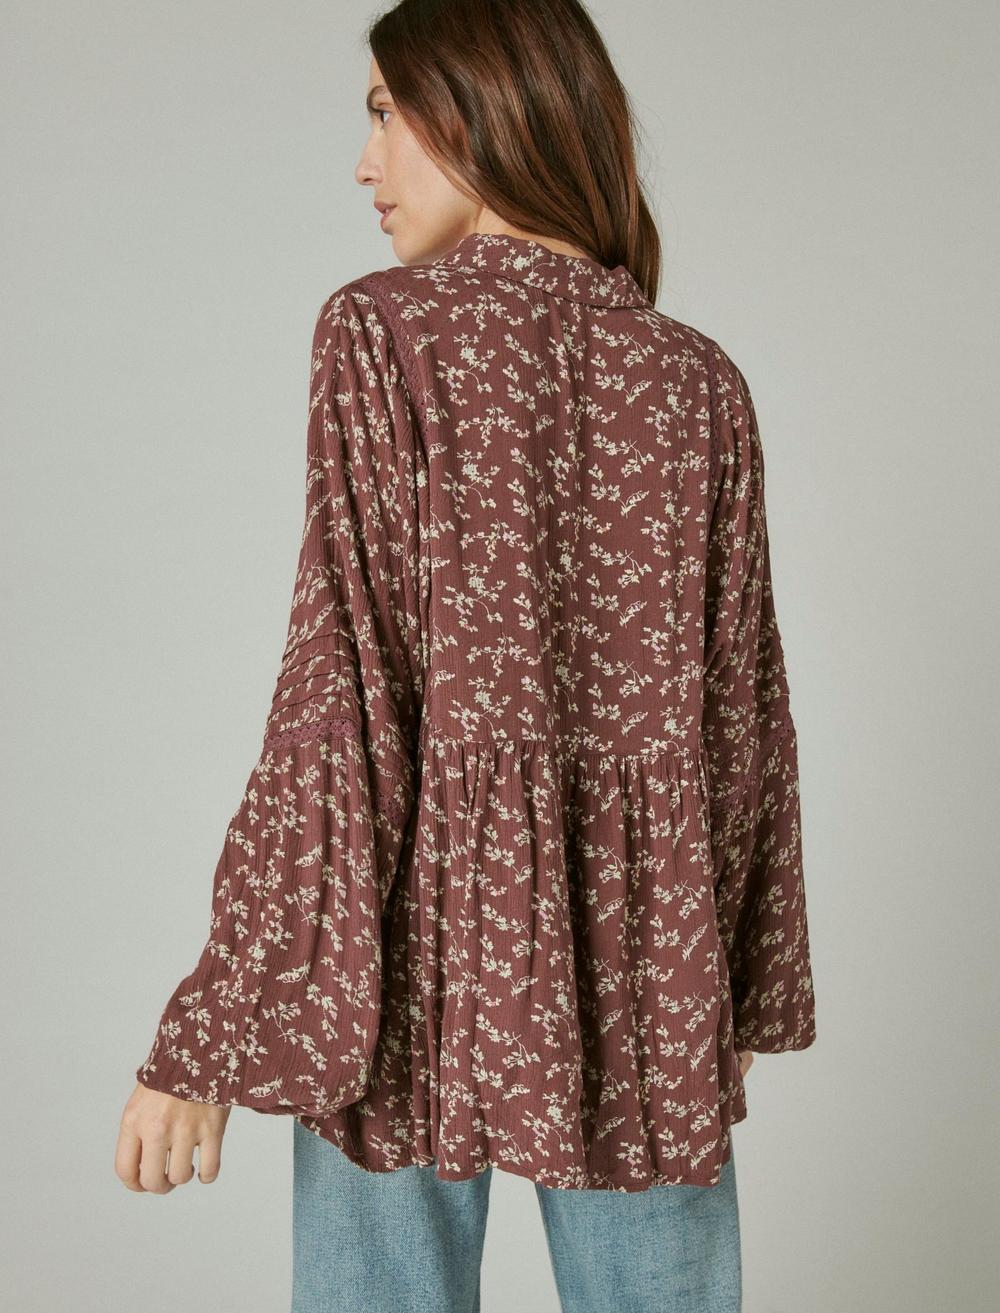 PRINTED LONG SLEEVE POPOVER TOP, image 4